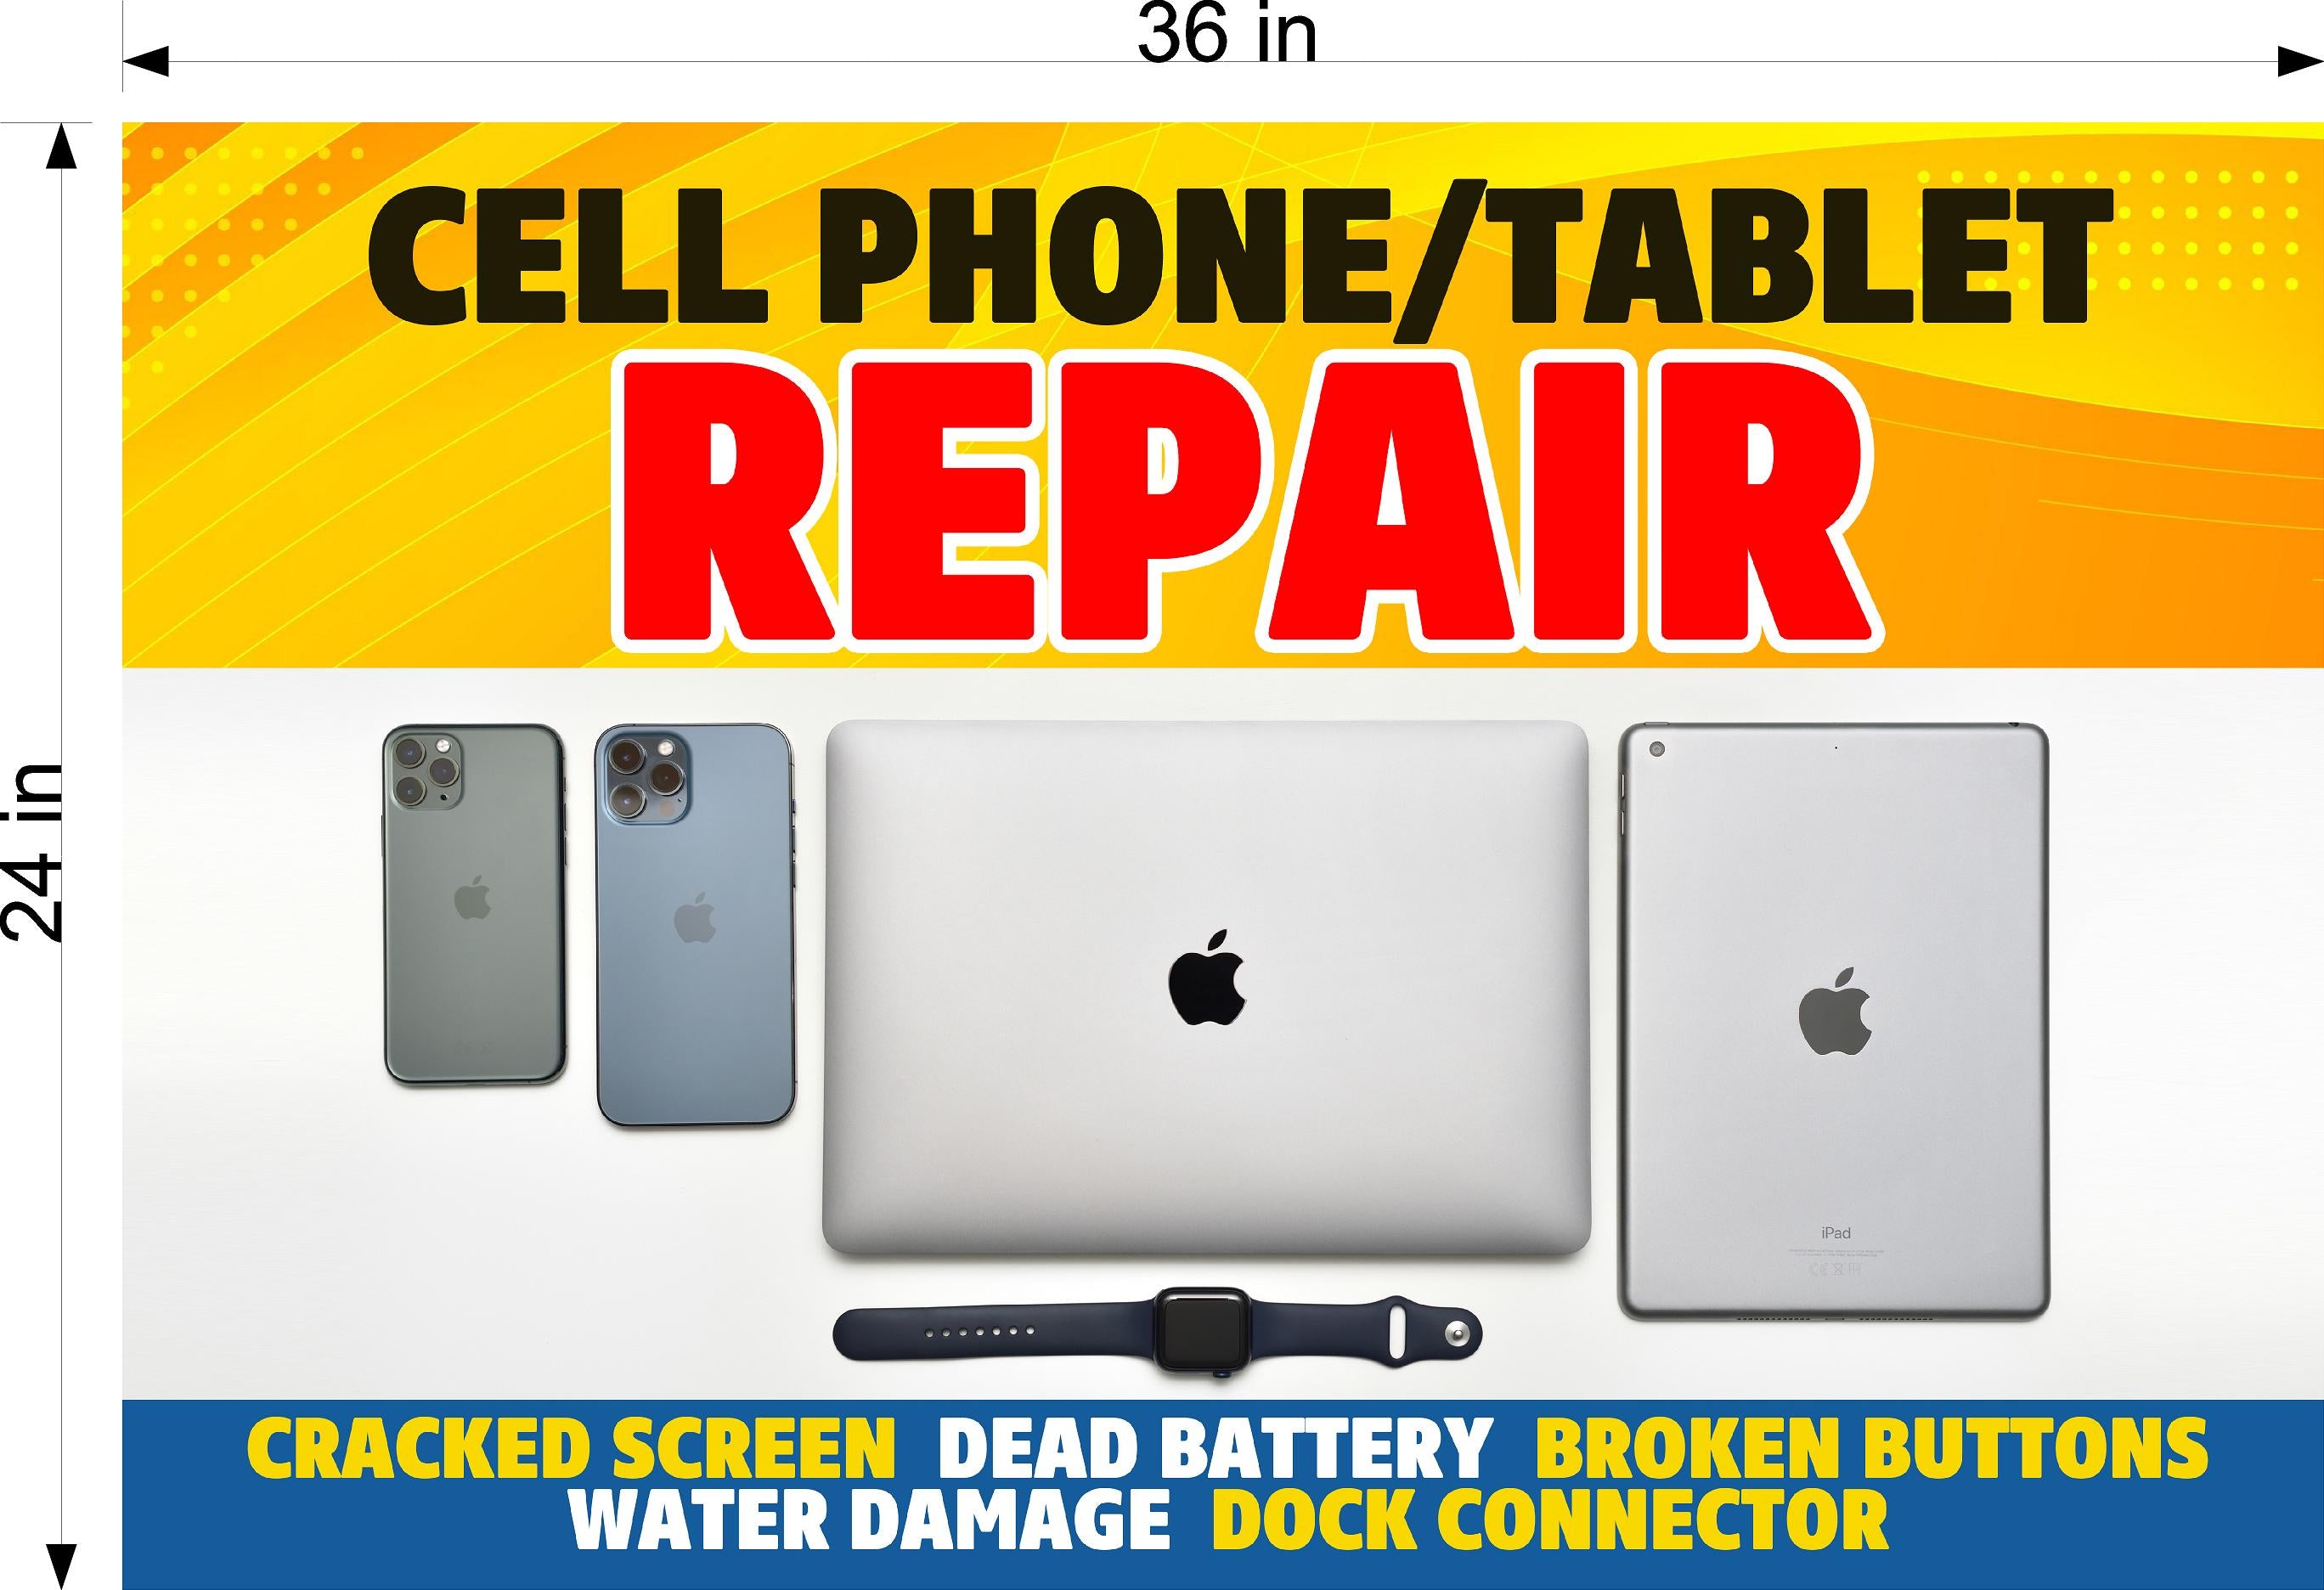 Phone Repair 09 Photo-Realistic Paper Poster Premium Interior Inside Sign Fix Smartphone buy Cell Computer Wall Window Non-Laminated Horizontal